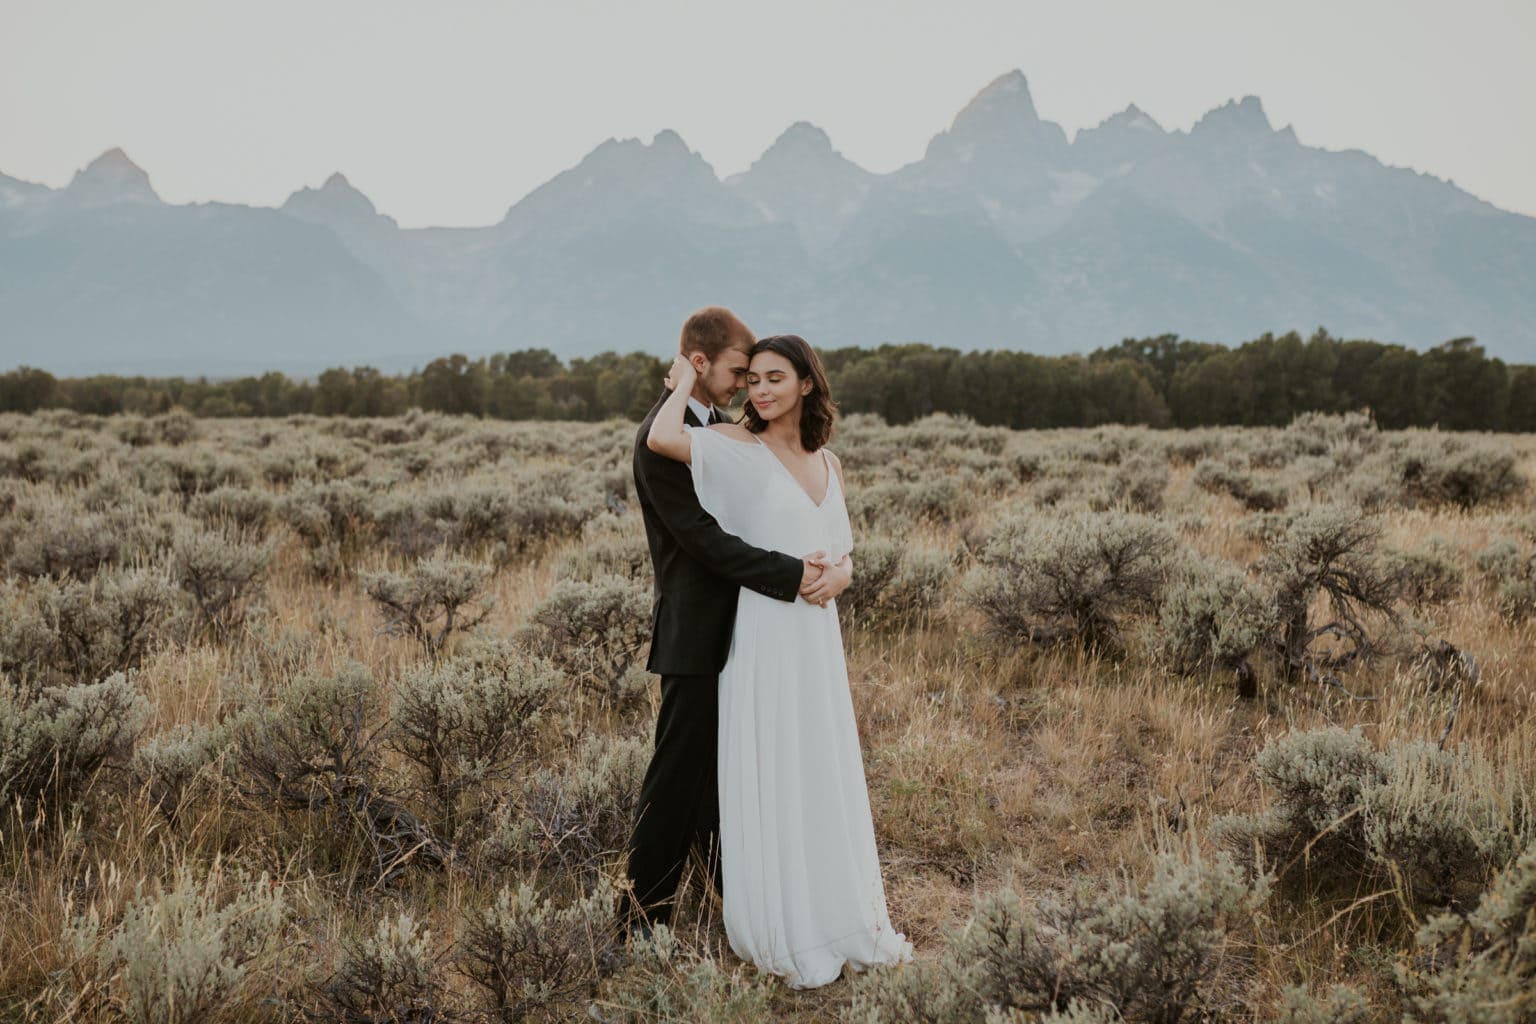 A bride and groom hugging in front of mountains, captured by Brianna Parks, a California elopement photographer.